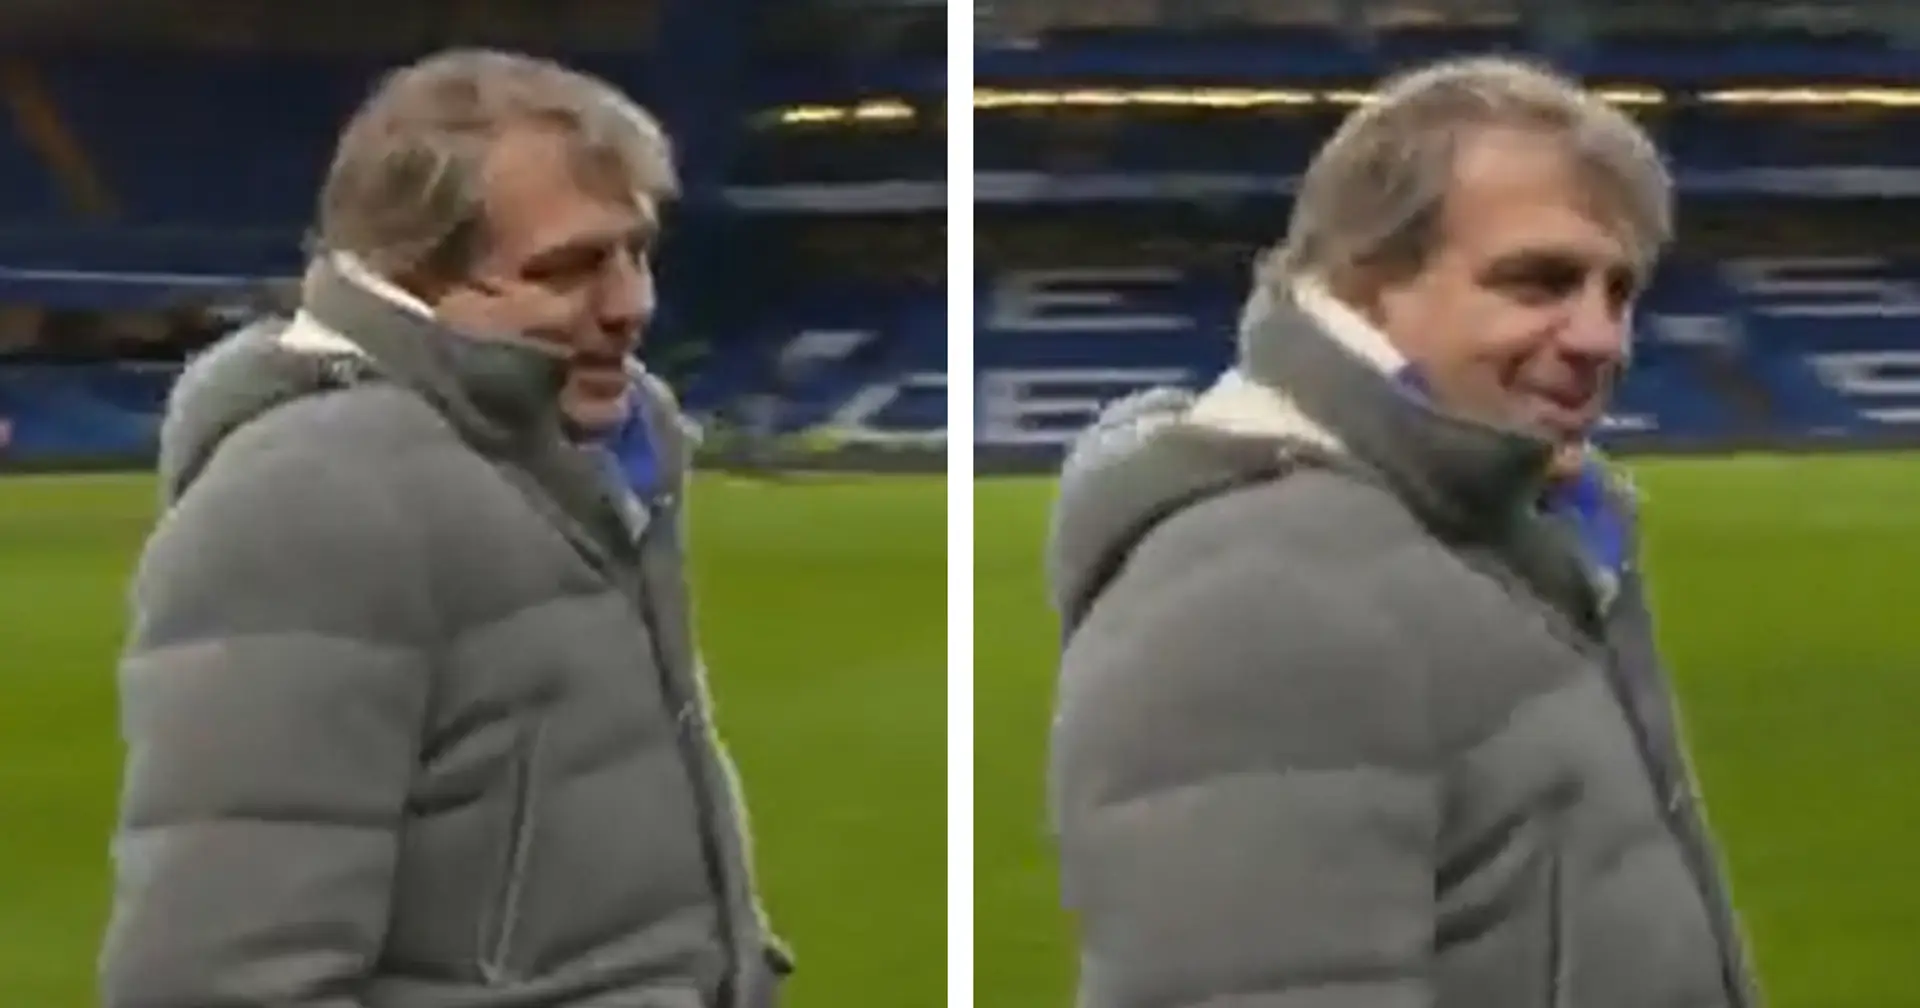 Caught on camera: Todd Boehly reacts to Chelsea's display vs Leeds